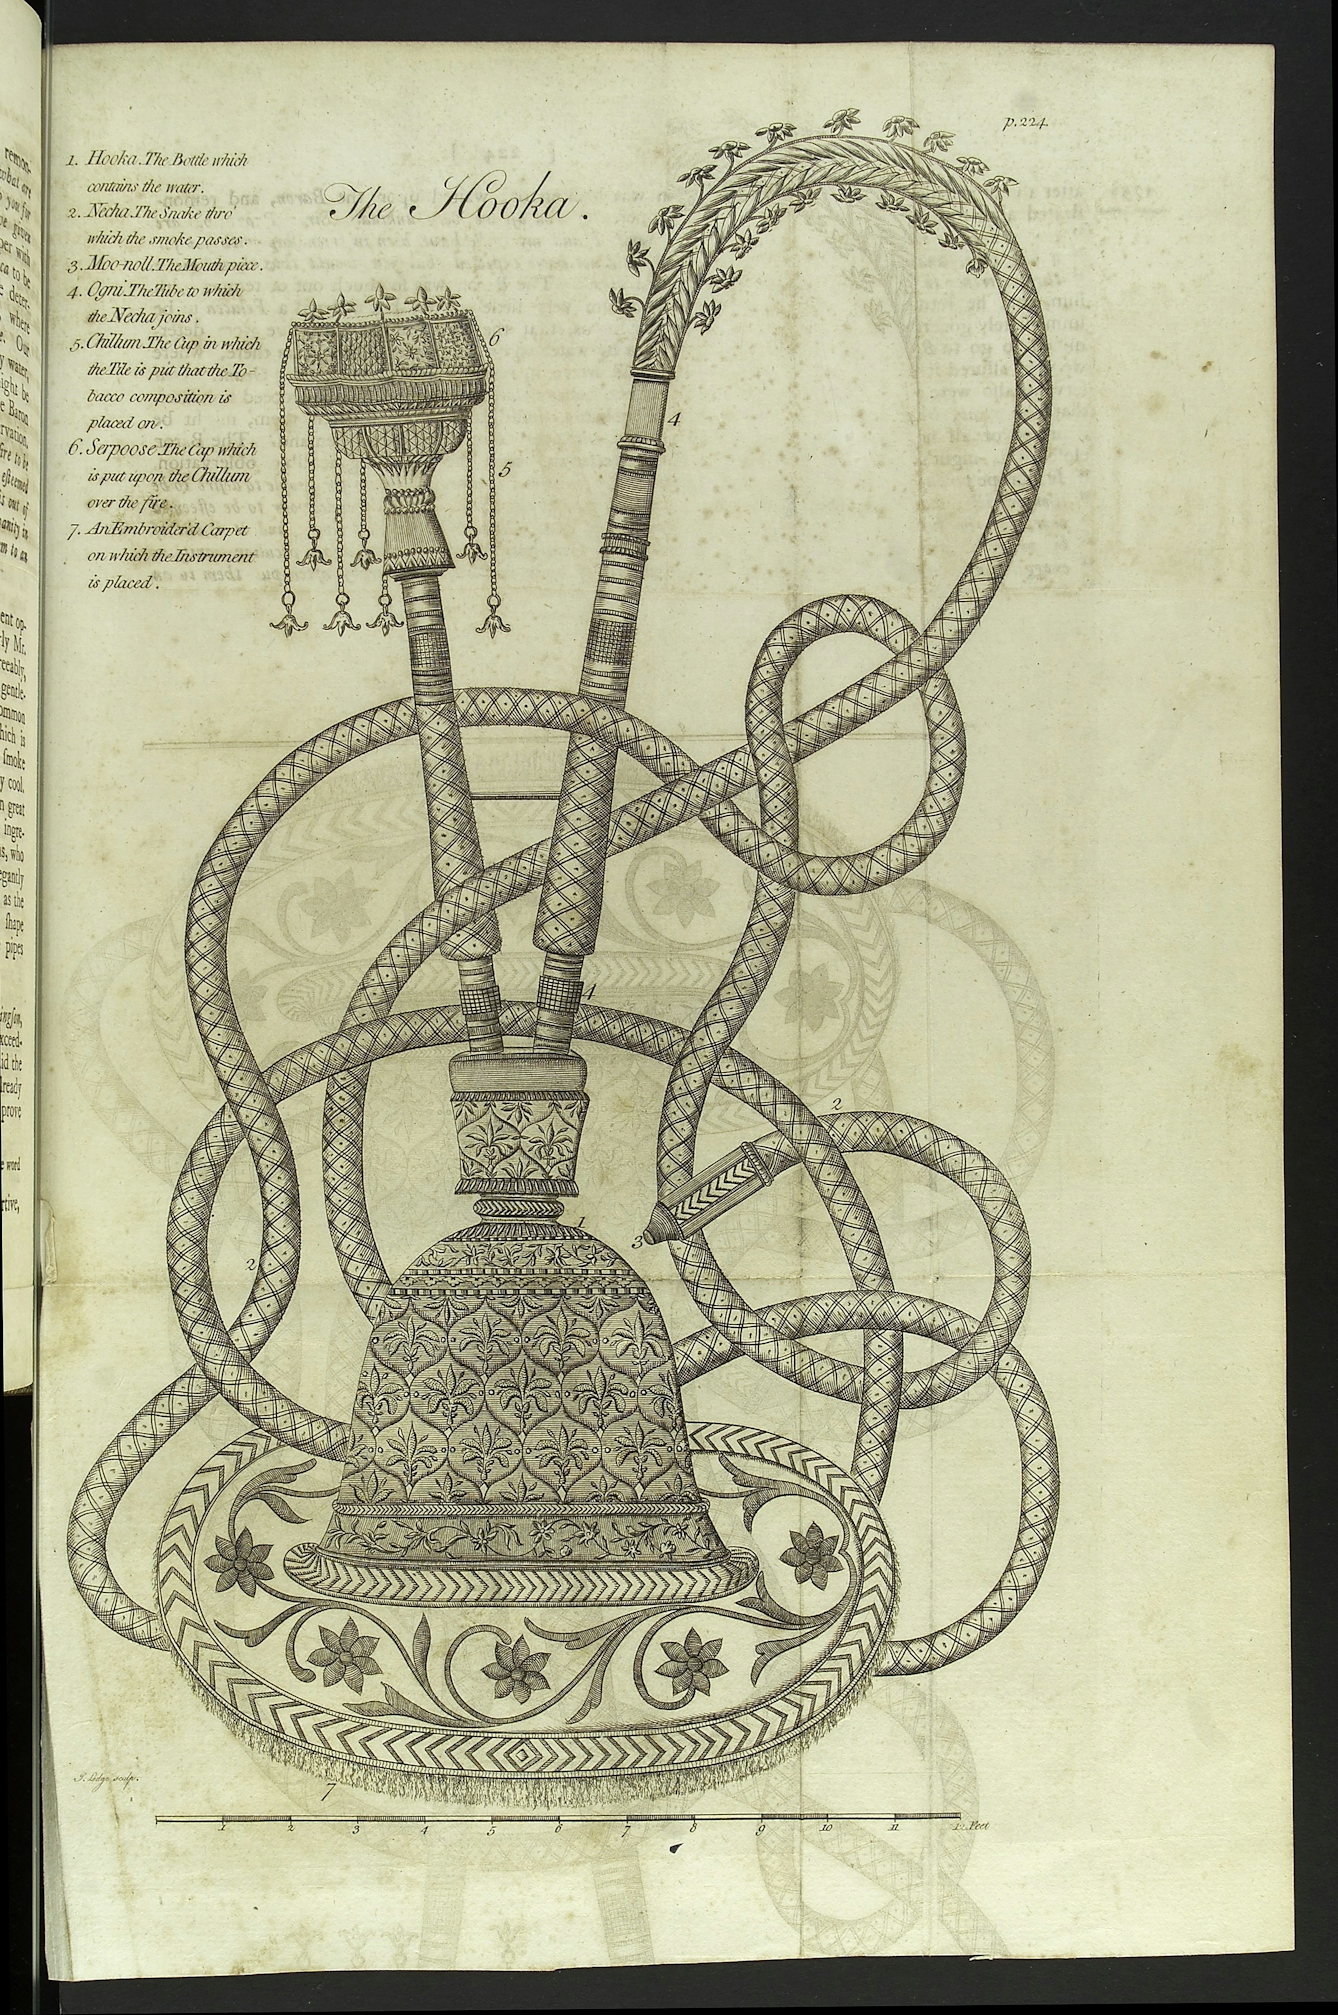 Copperplate engraving showing a hookah.